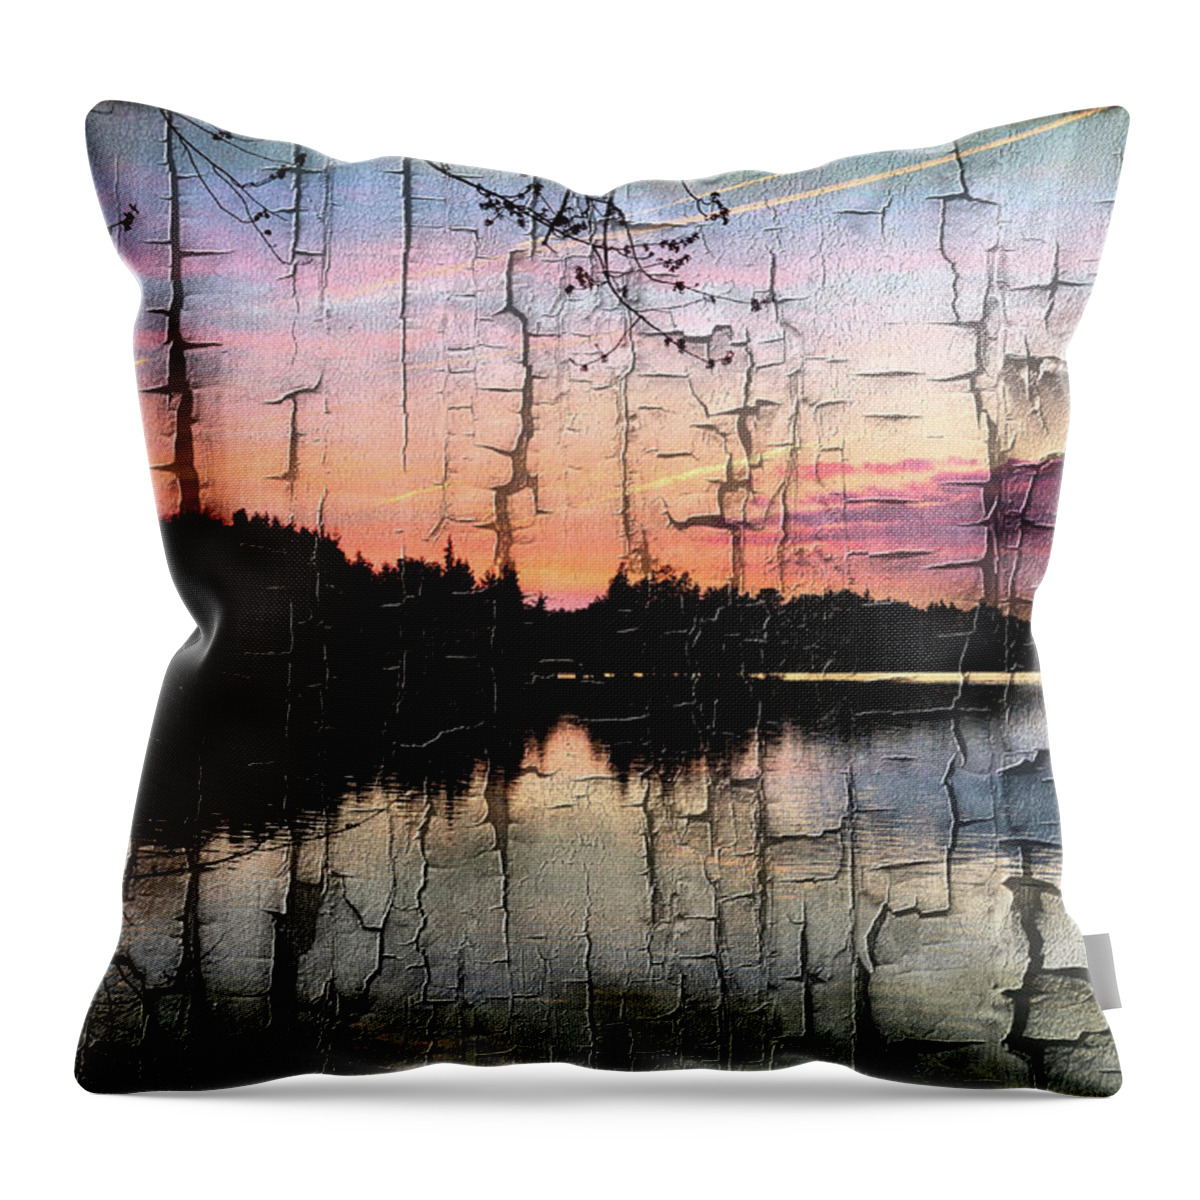 Landscape Throw Pillow featuring the digital art Lake Horicon 4 by Sami Martin